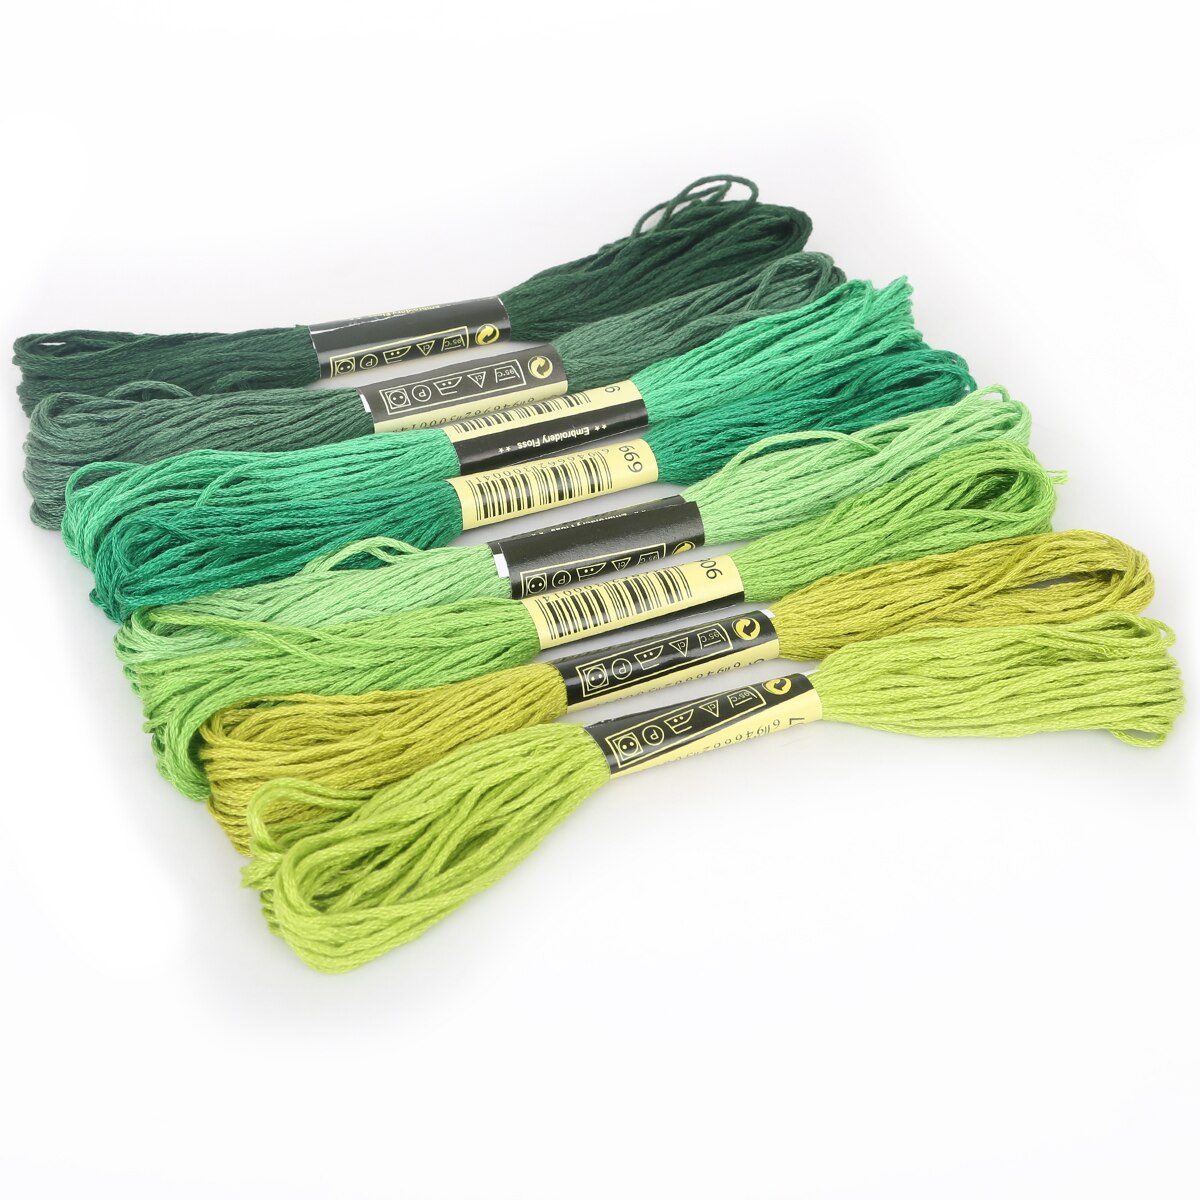 8pcs 7.5m Multiple Color Thread Cross Stitch Cotton Sewing Skeins Craft Embroidery Thread Floss Kit DIY Sewing Tools Accessories: Green